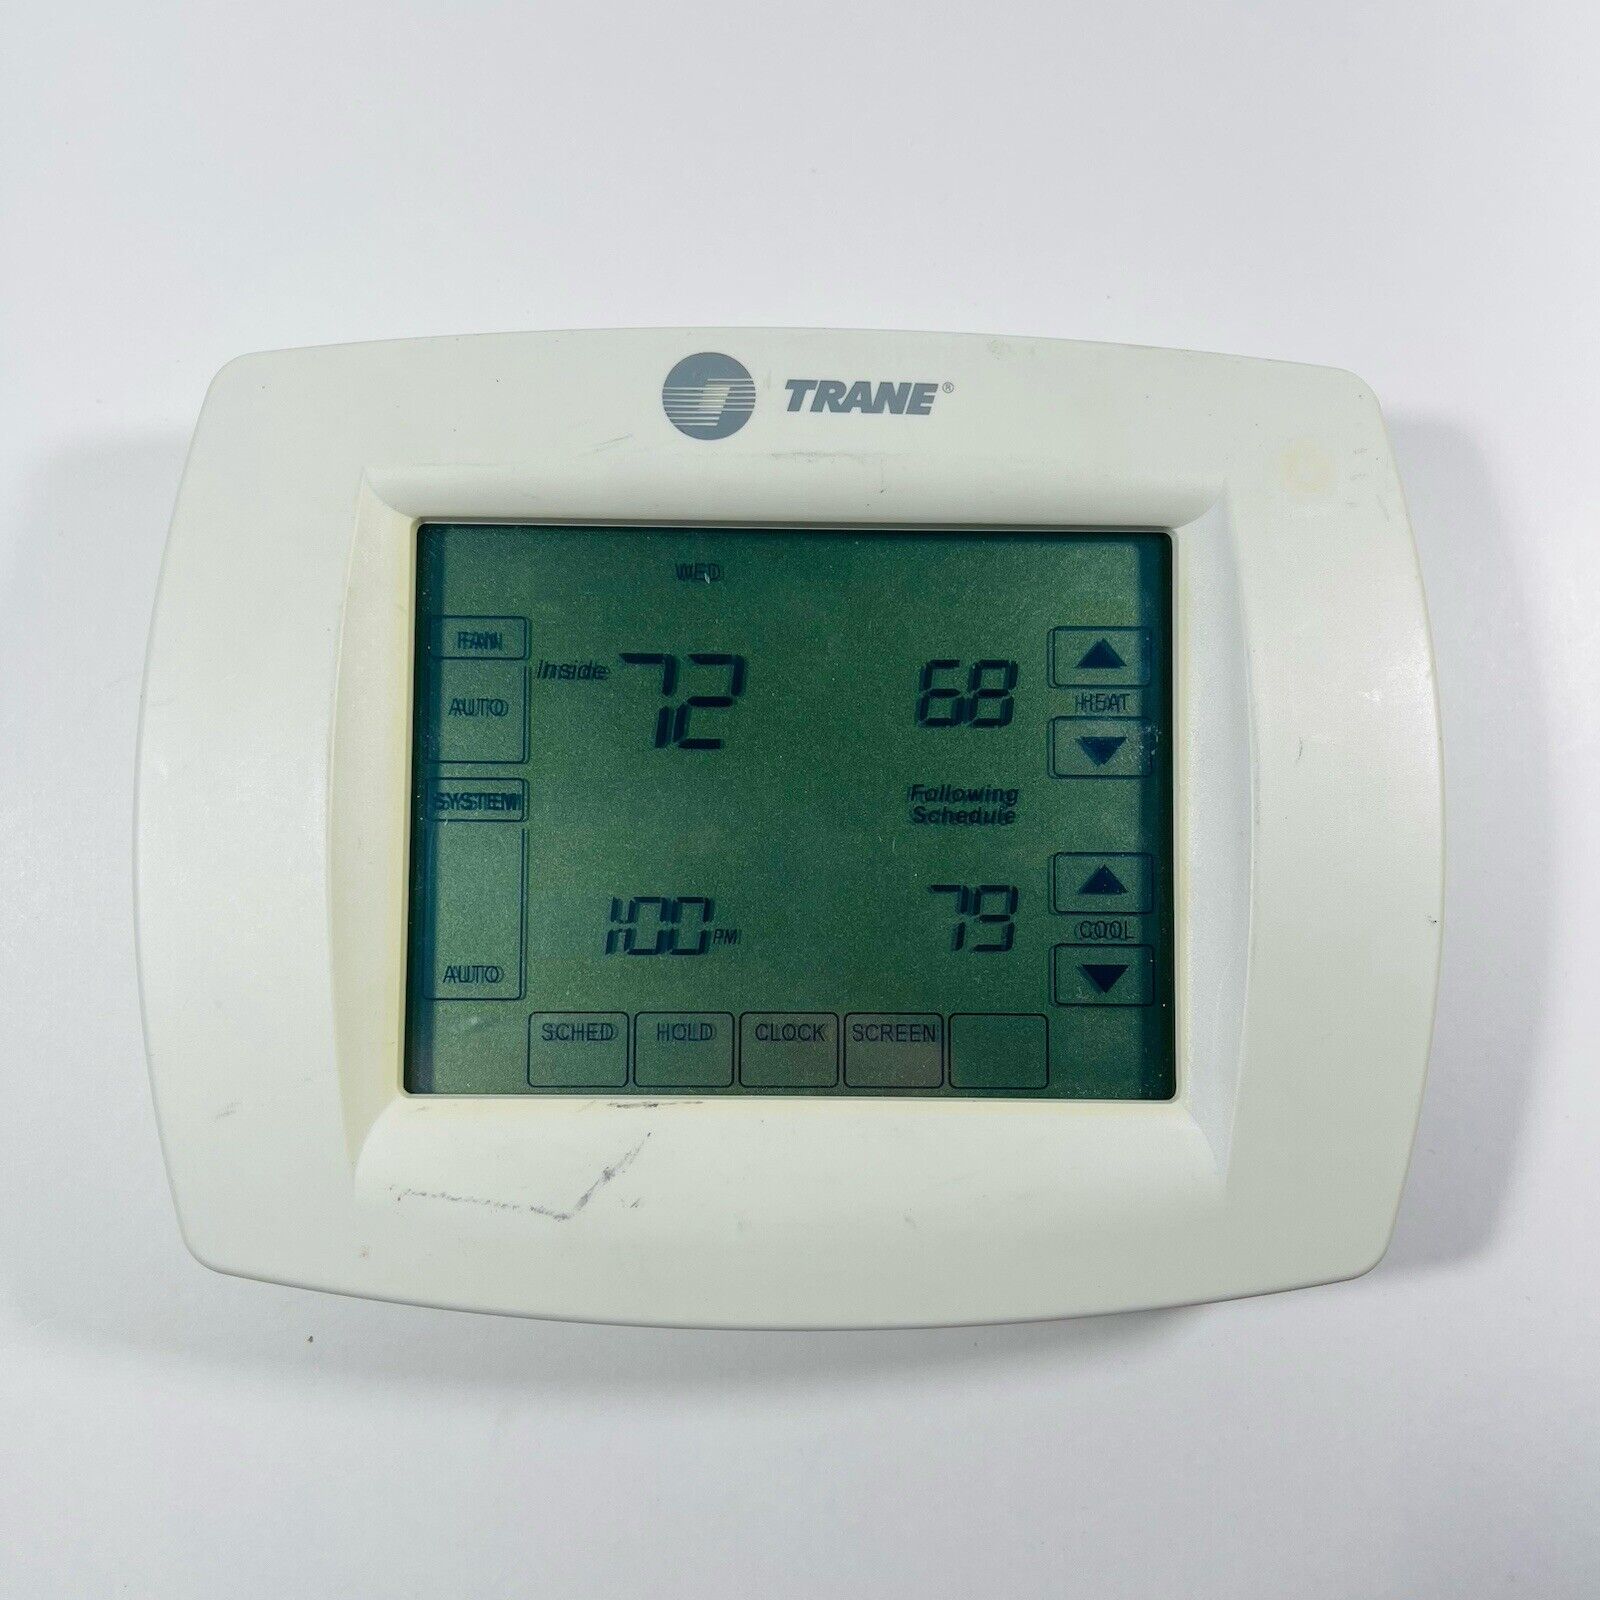 TRANE TCONT802AS32DAA  TH8320U1040 Programmable Thermostat with touchscreen